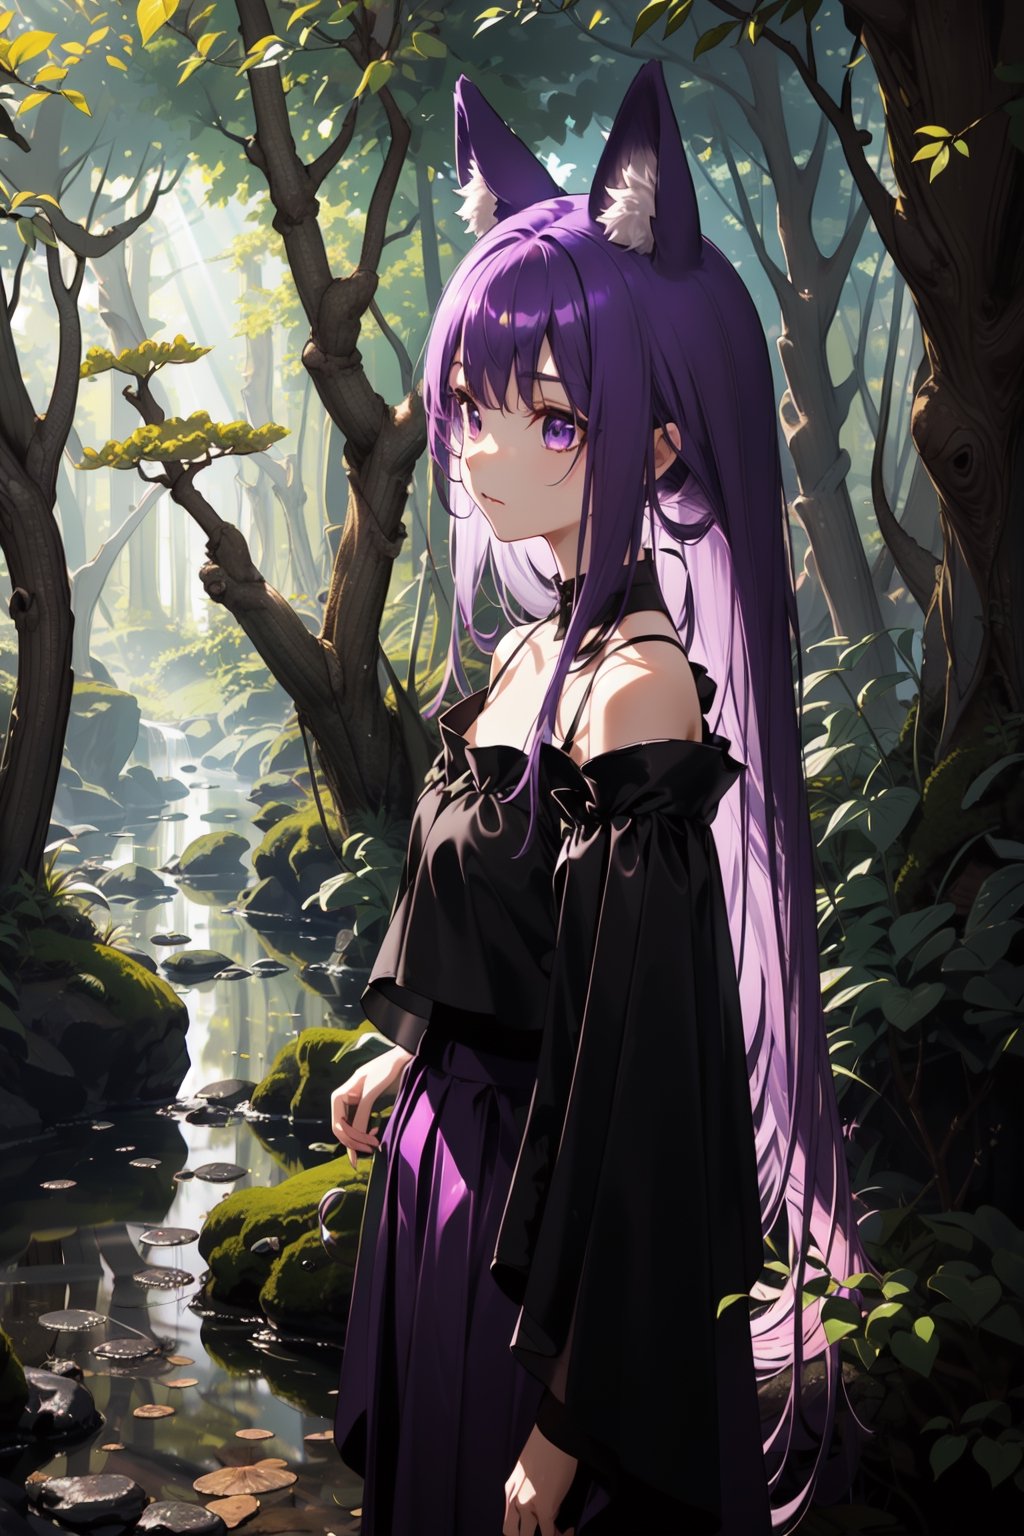 forest, psychic glow, long skirt, open blouse, long purple hair, shiny purple eyes, long fringe hair, long ears, head and shoulder shot, close up, nature background, river, daylight, sunlight, woods, bright daylight, prism glow, stood by tree, shite blouse, long purple animal ears